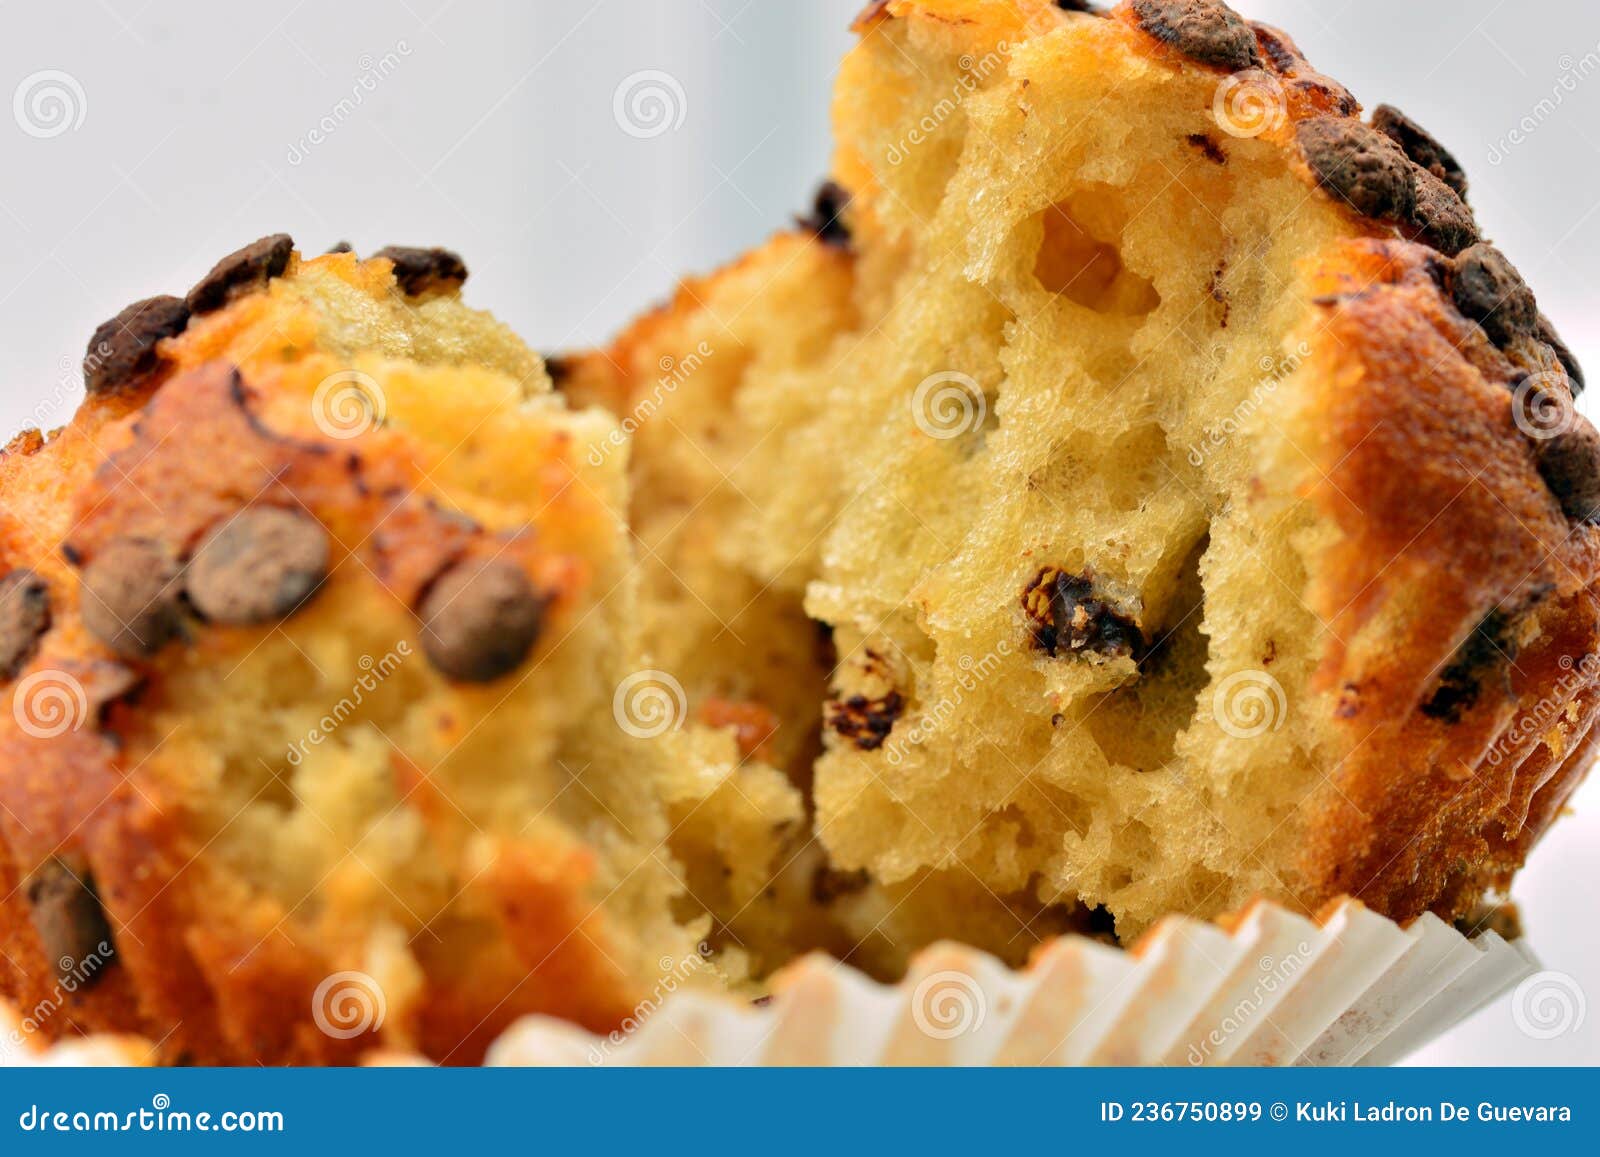 detail of fluffy chocolate chip muffins